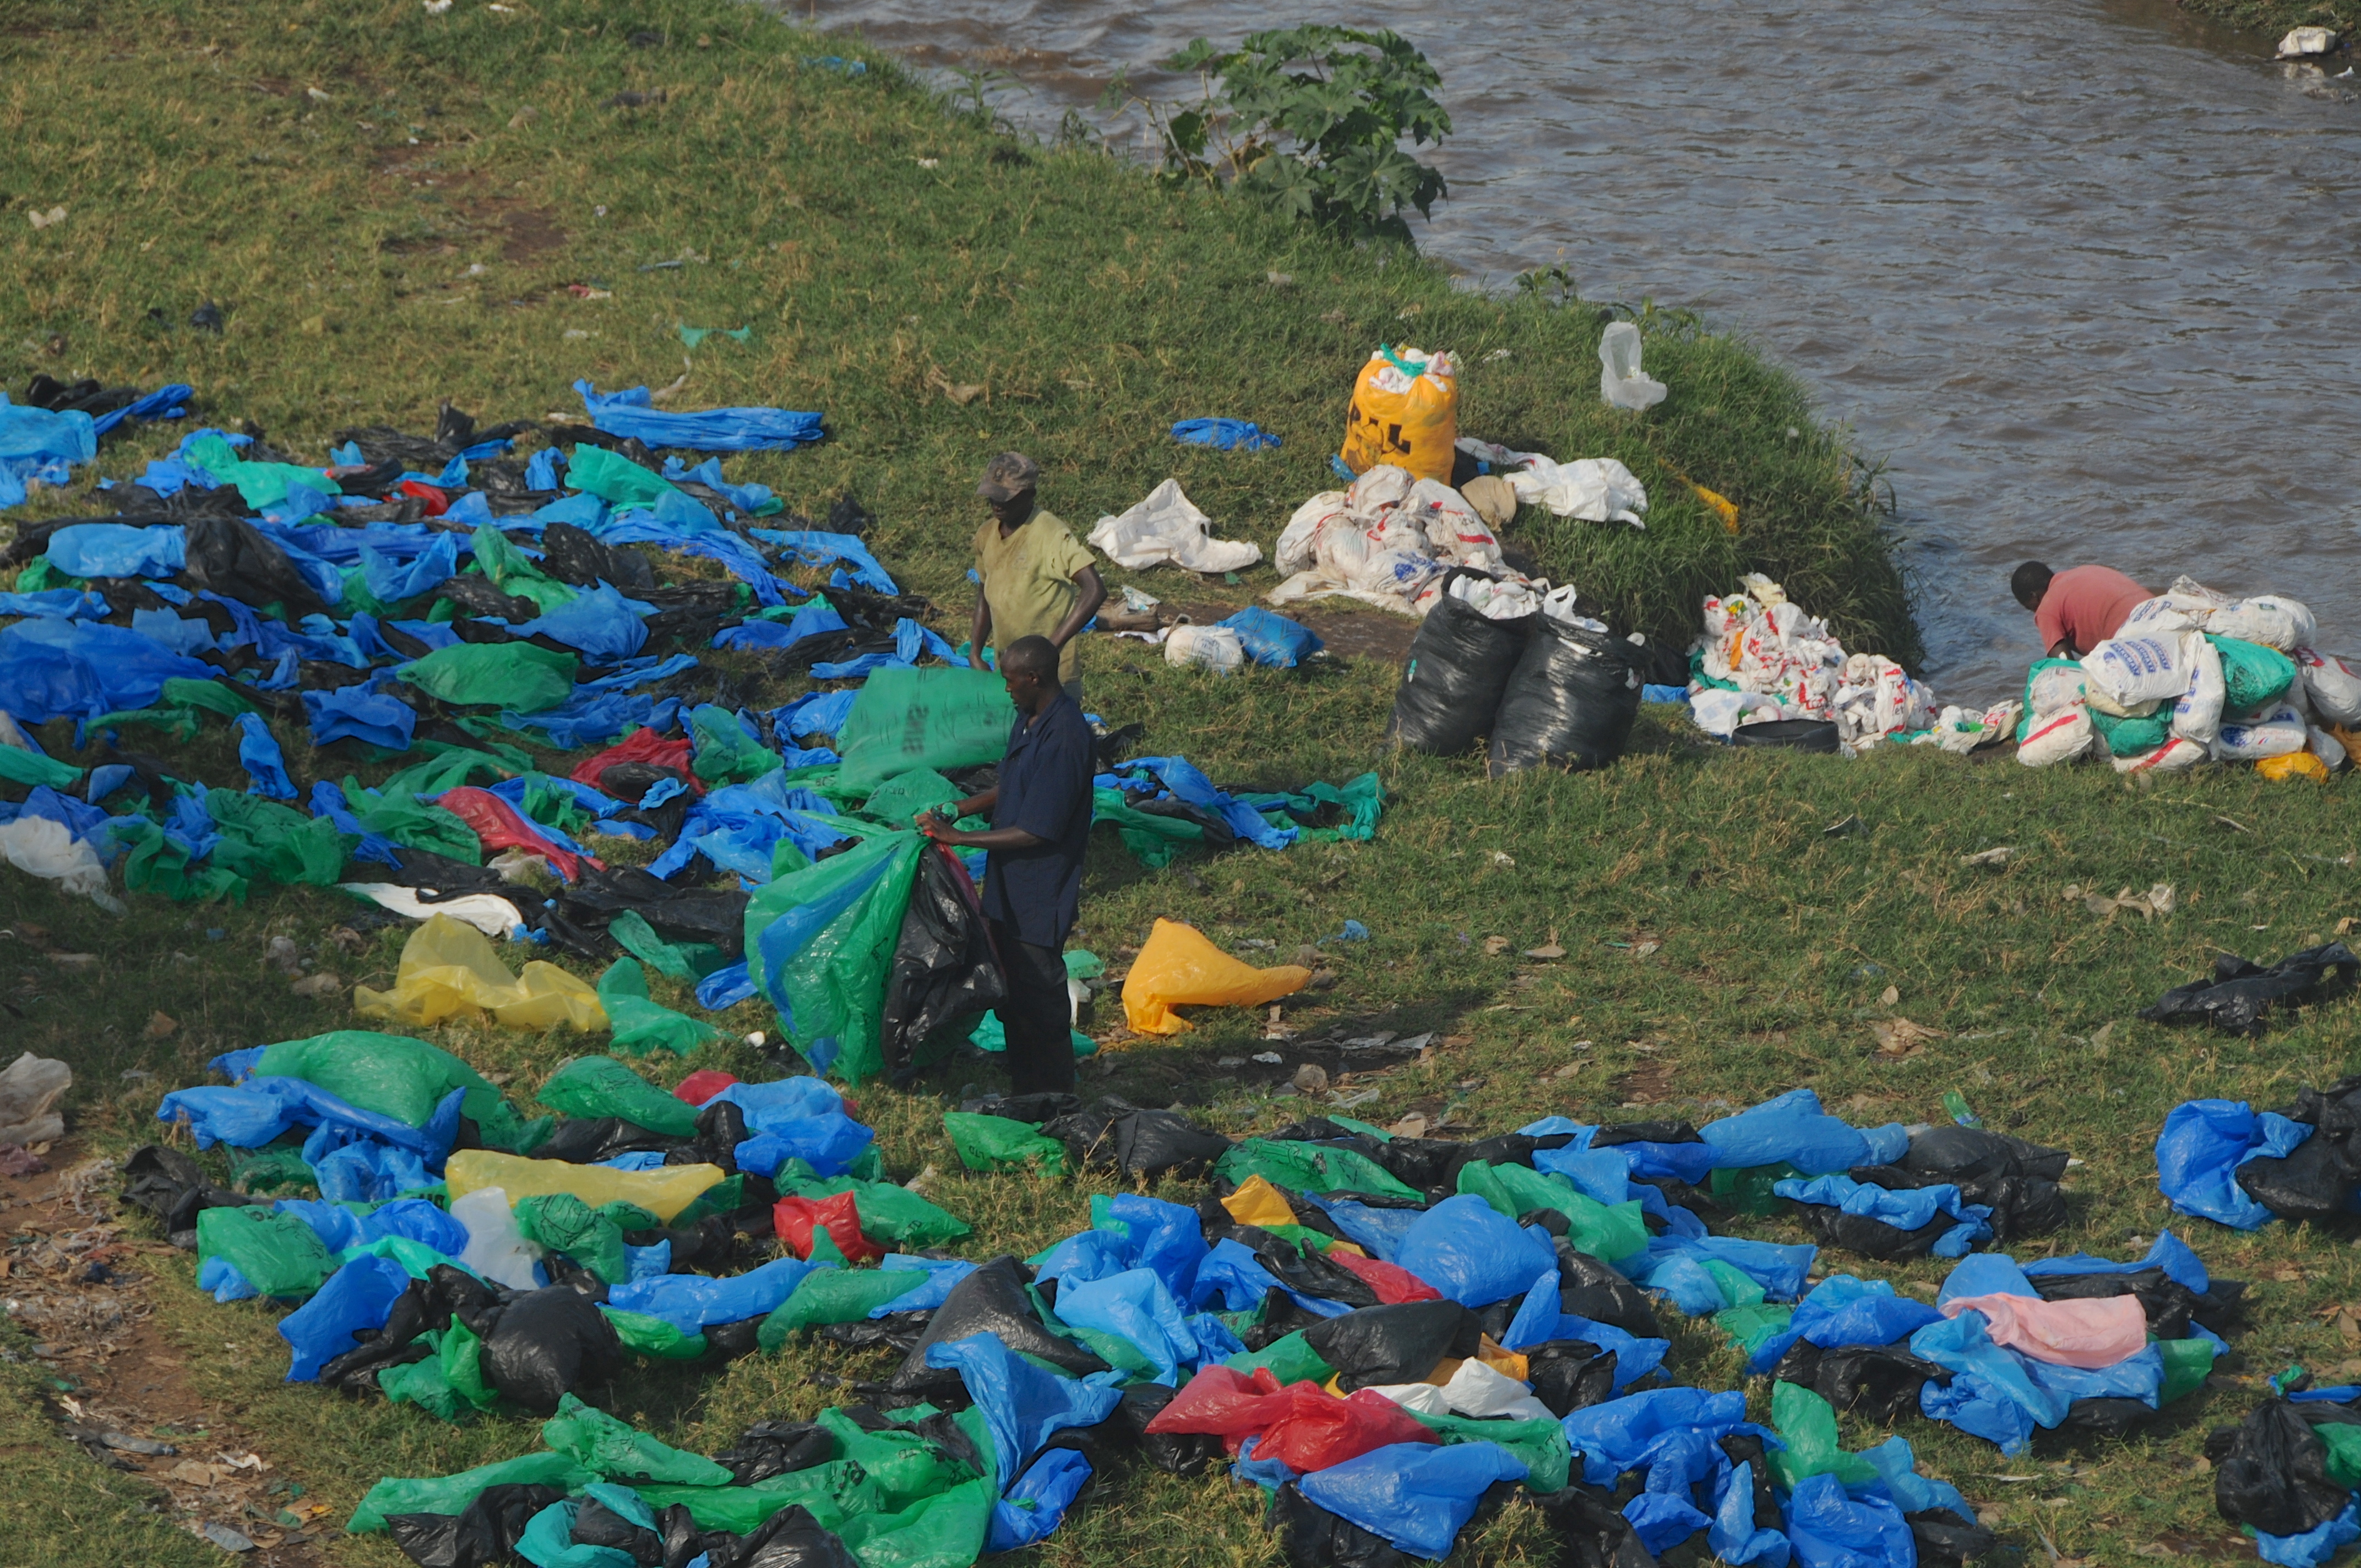 This undated photo shows Kenyans collecting used plastic bags from Nairobi River to resell in marketplaces near the Mukuru slum in Kenya. (Wendy Stone—Corbis/Getty Images)